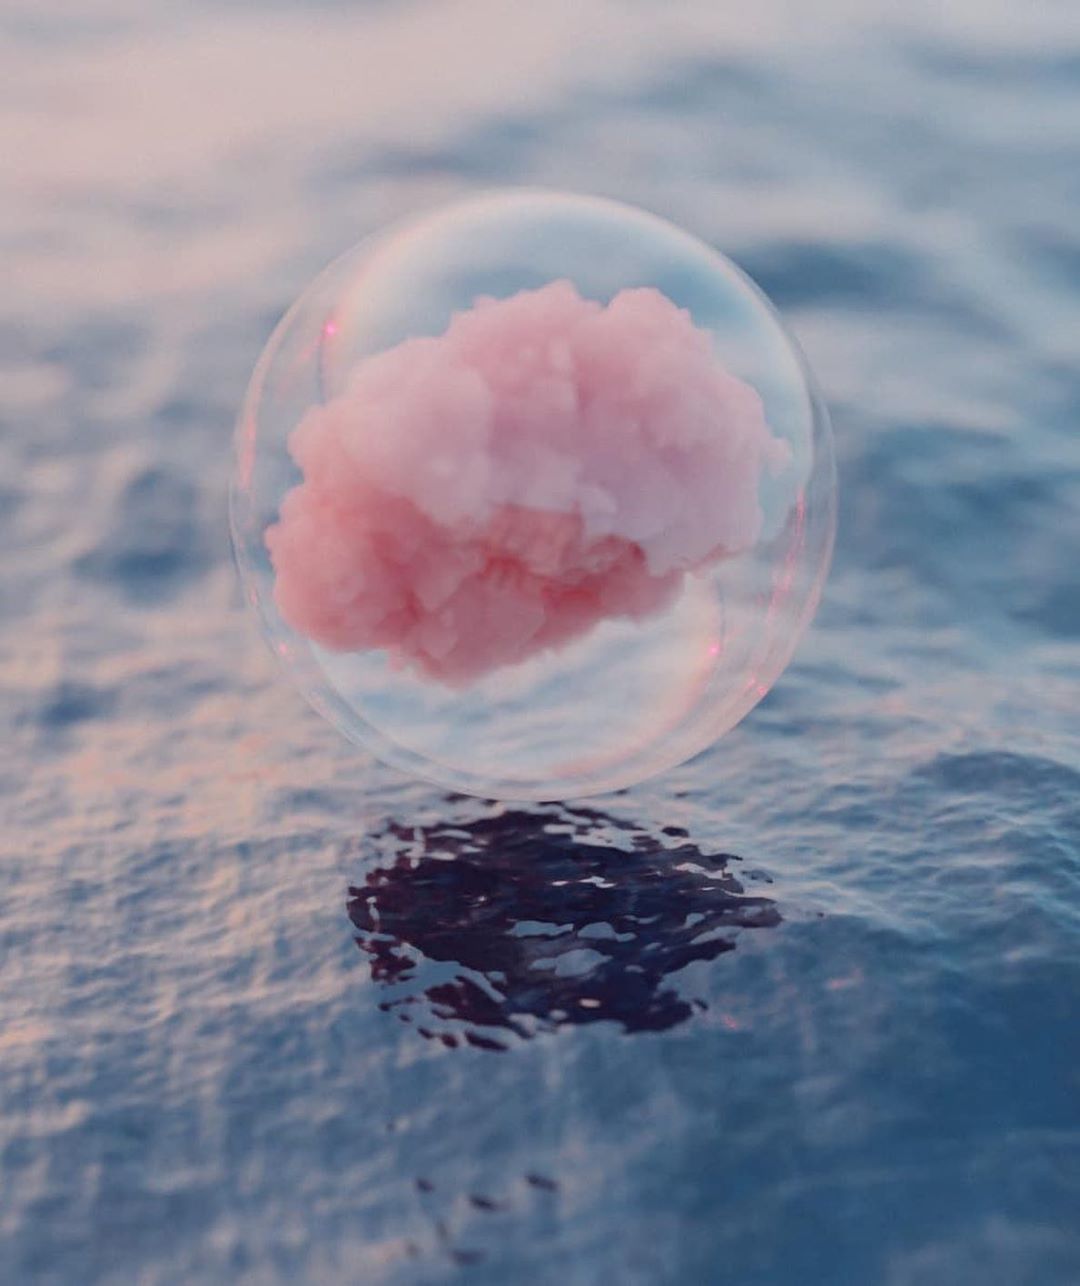 A pink cloud in a bubble floating on water - Bubbles